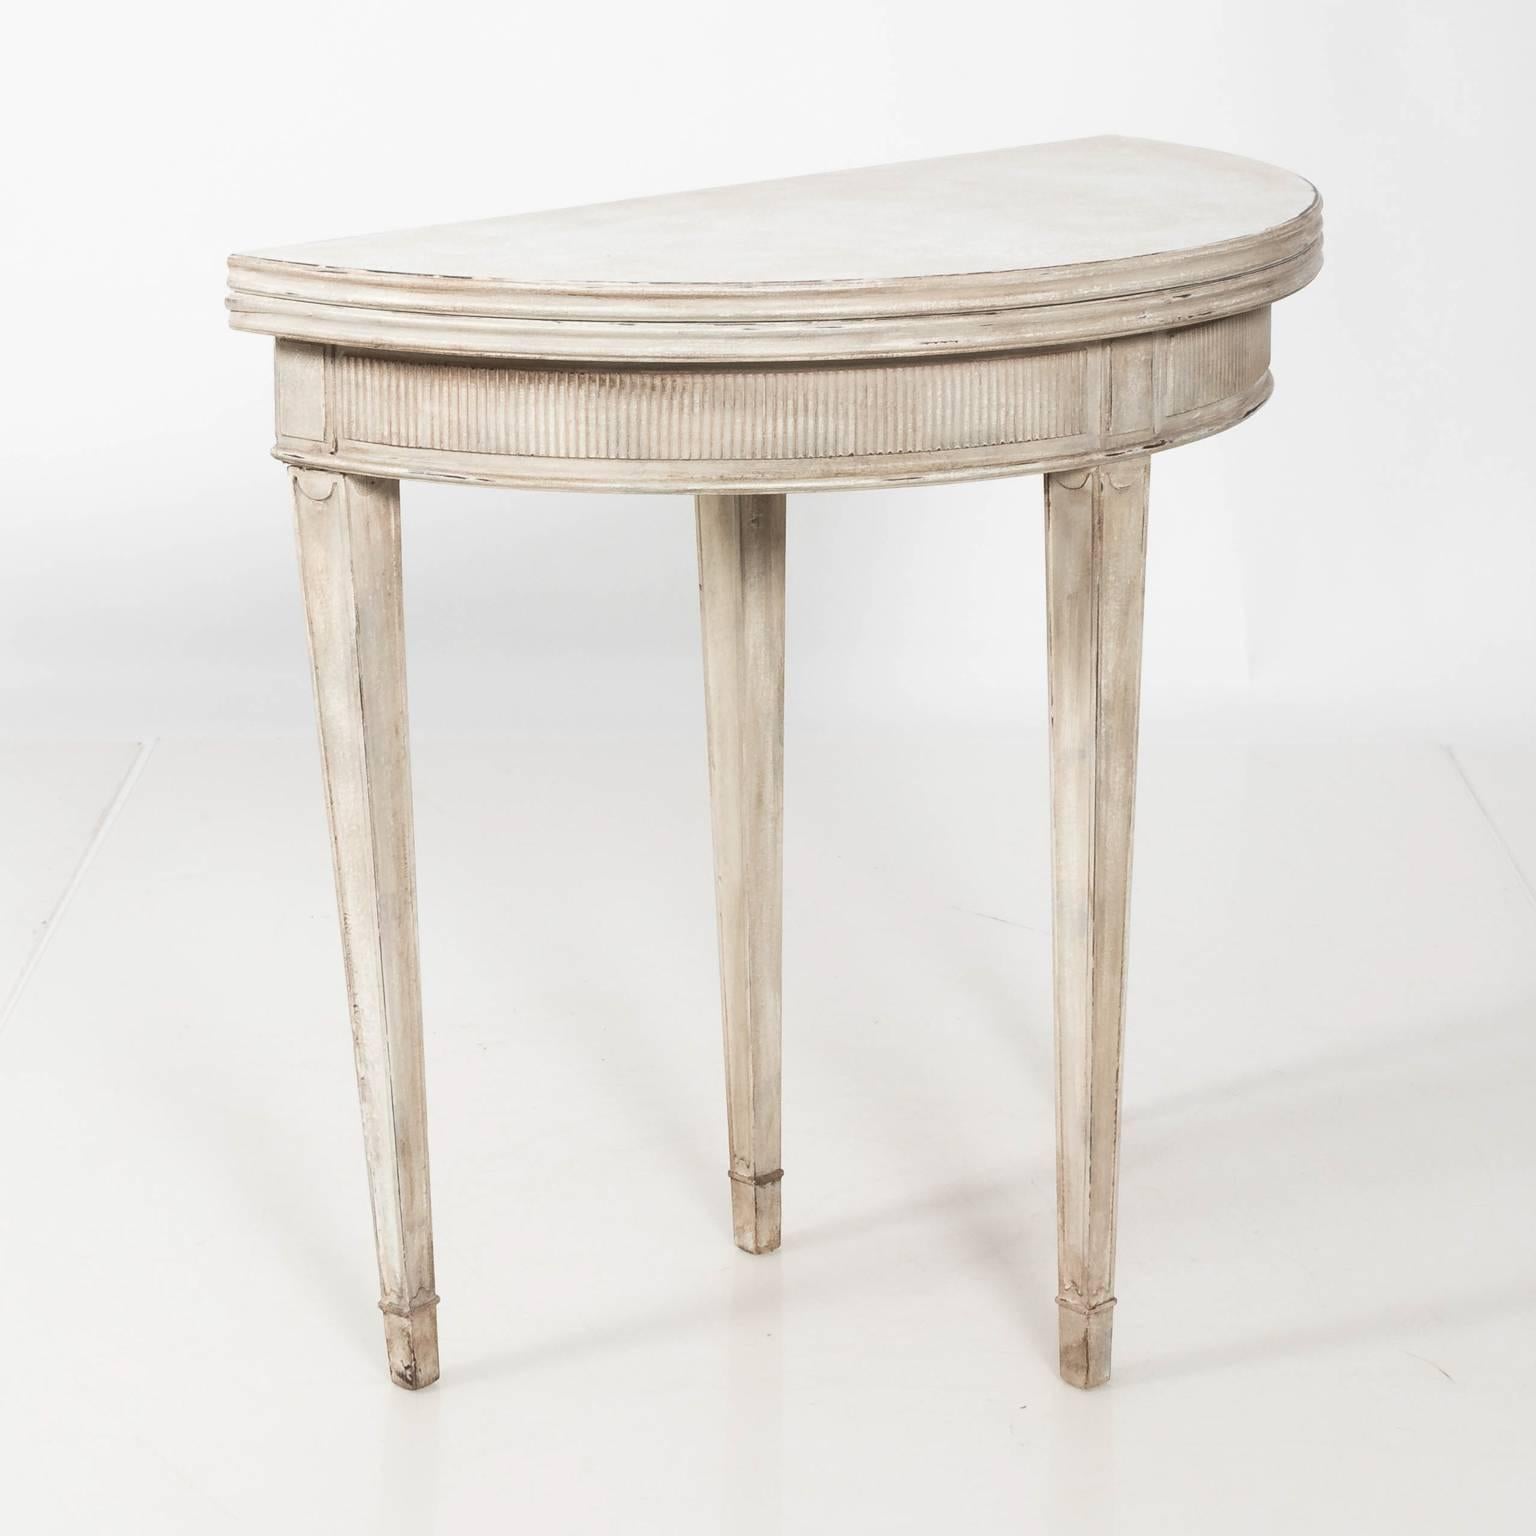 Mid-20th Century Gustavian Style Grey Painted Flip Top Demilune Table